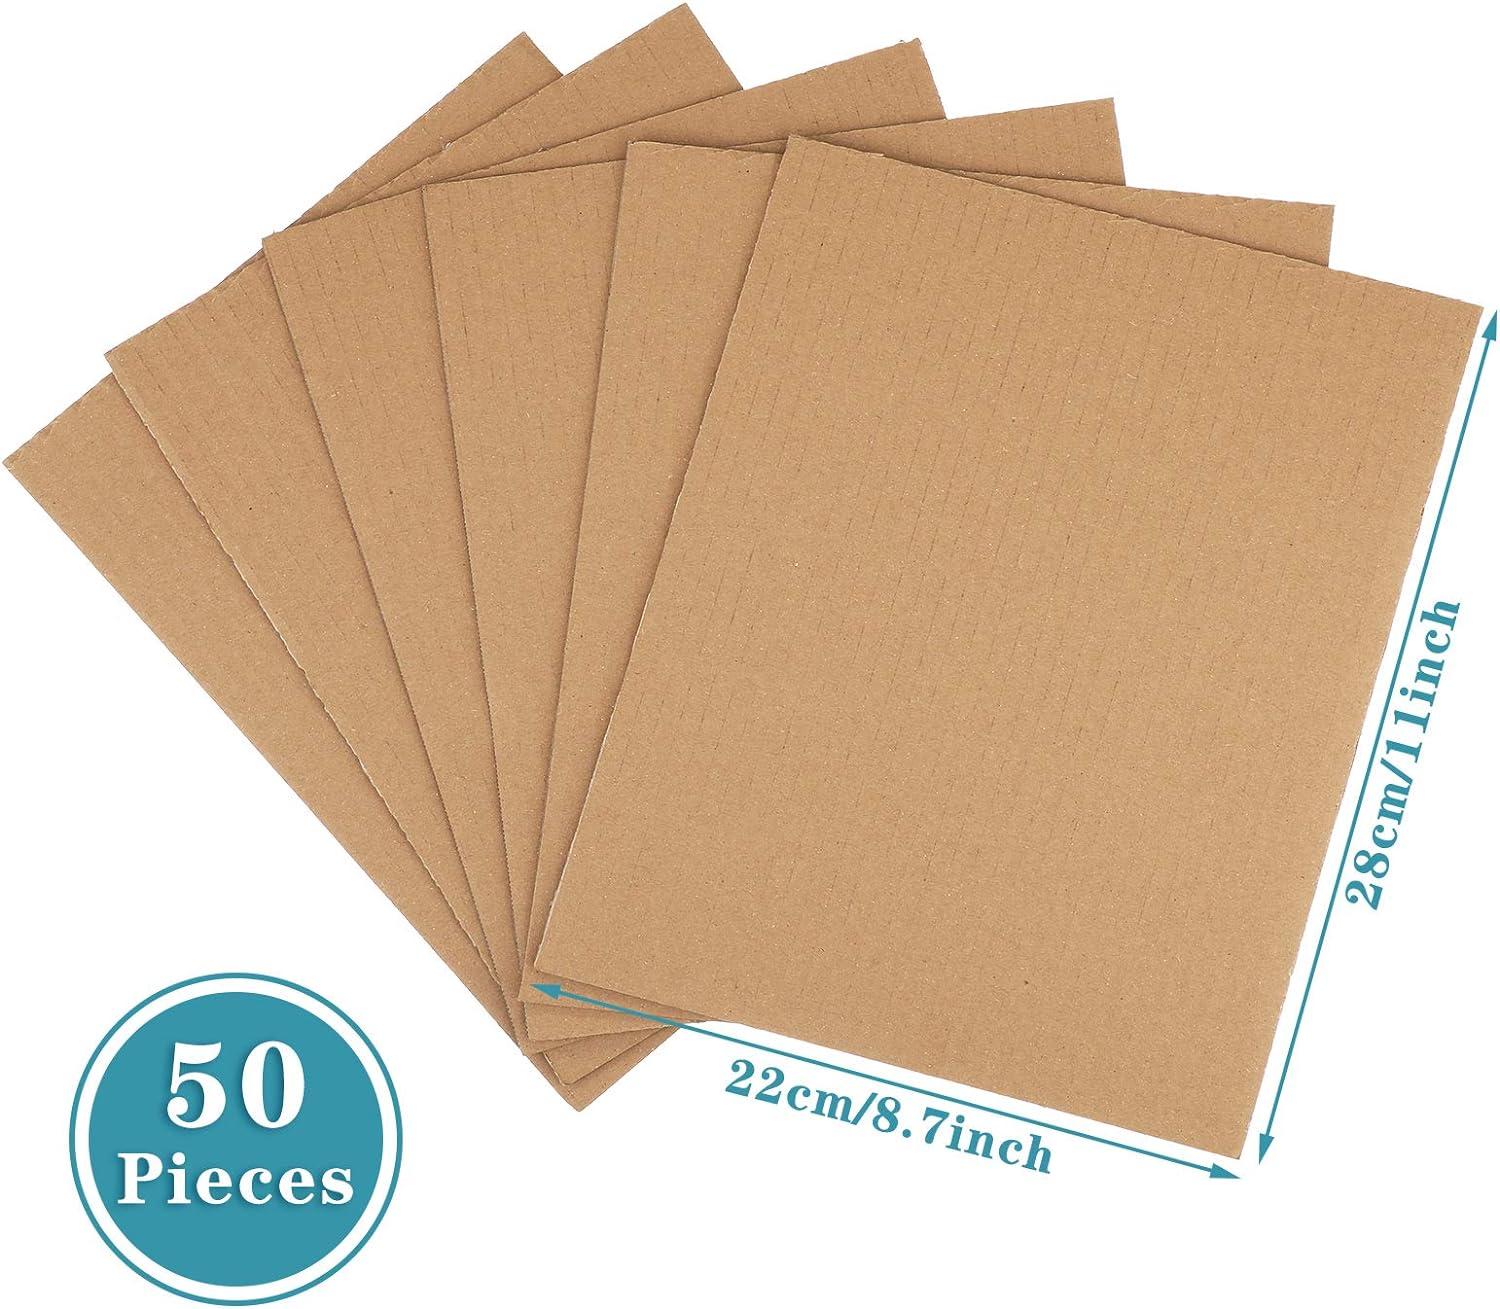  50 Pack Corrugated Cardboard Sheets Flat Cardboard Sheets  Cardboard Inserts Flat Cardboard Squares Separators for Art Projects DIY  Crafts Supplies (White, 8 x 10 Inch) : Arts, Crafts & Sewing